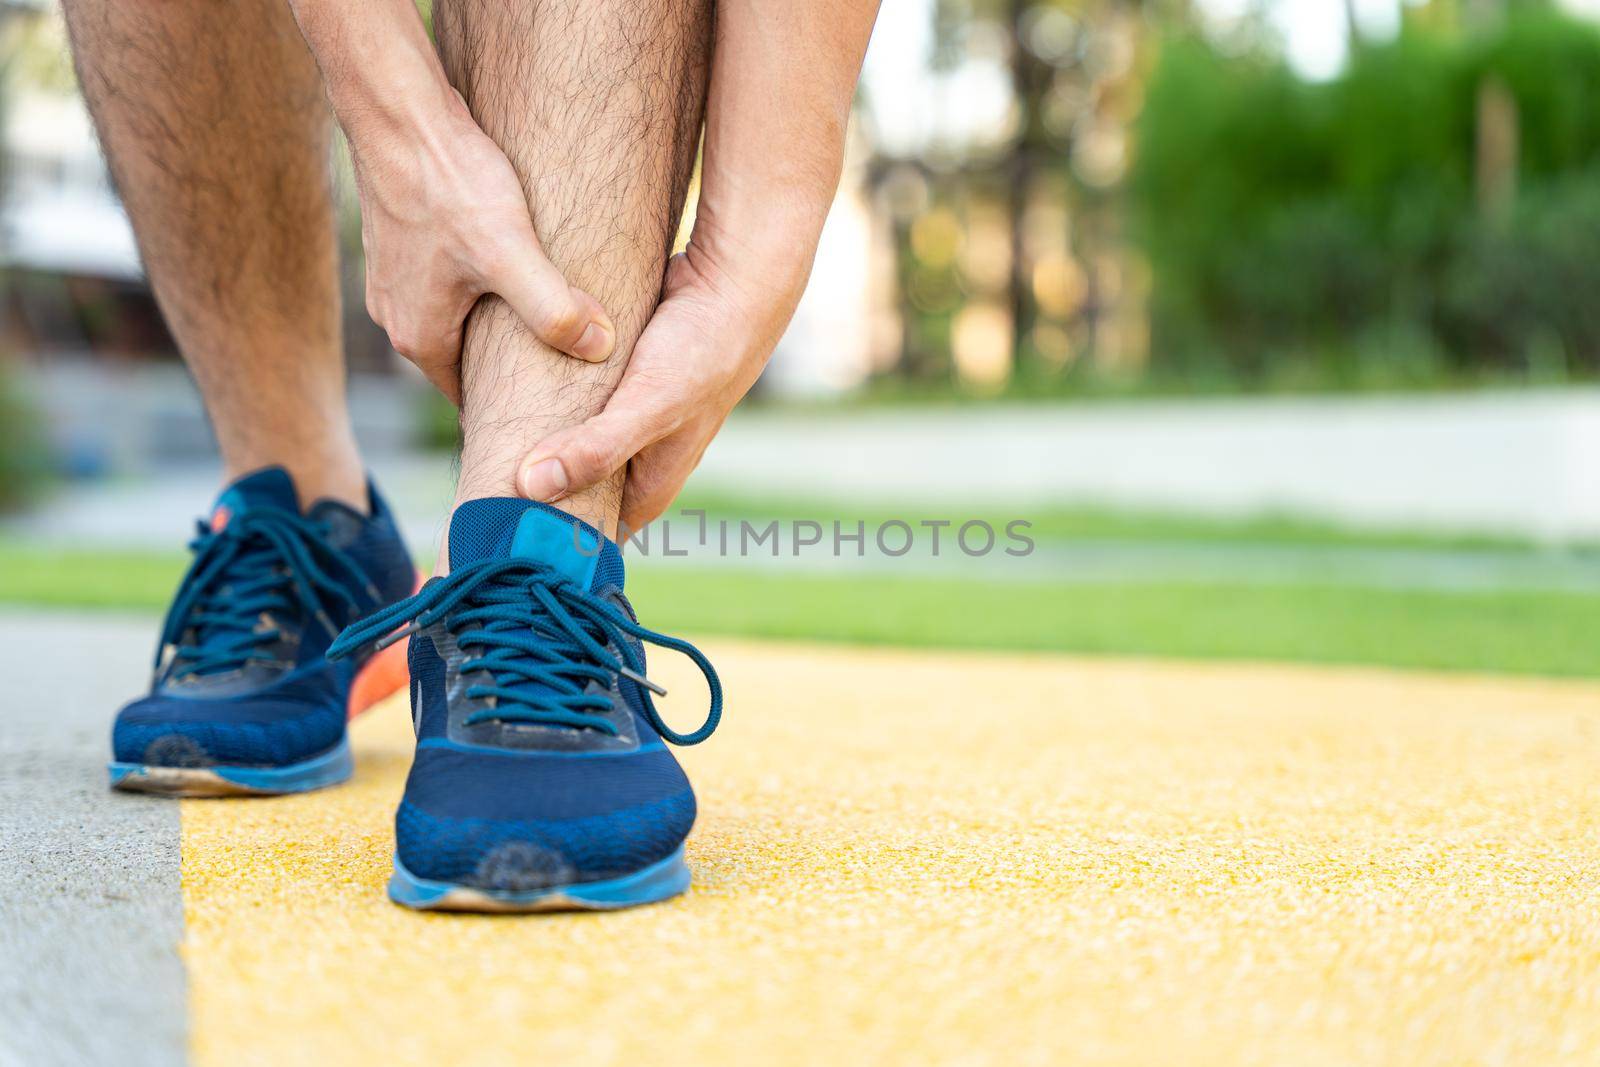 Male runner athlete leg injury and pain. Hands grab painful leg while running in the park. by mikesaran